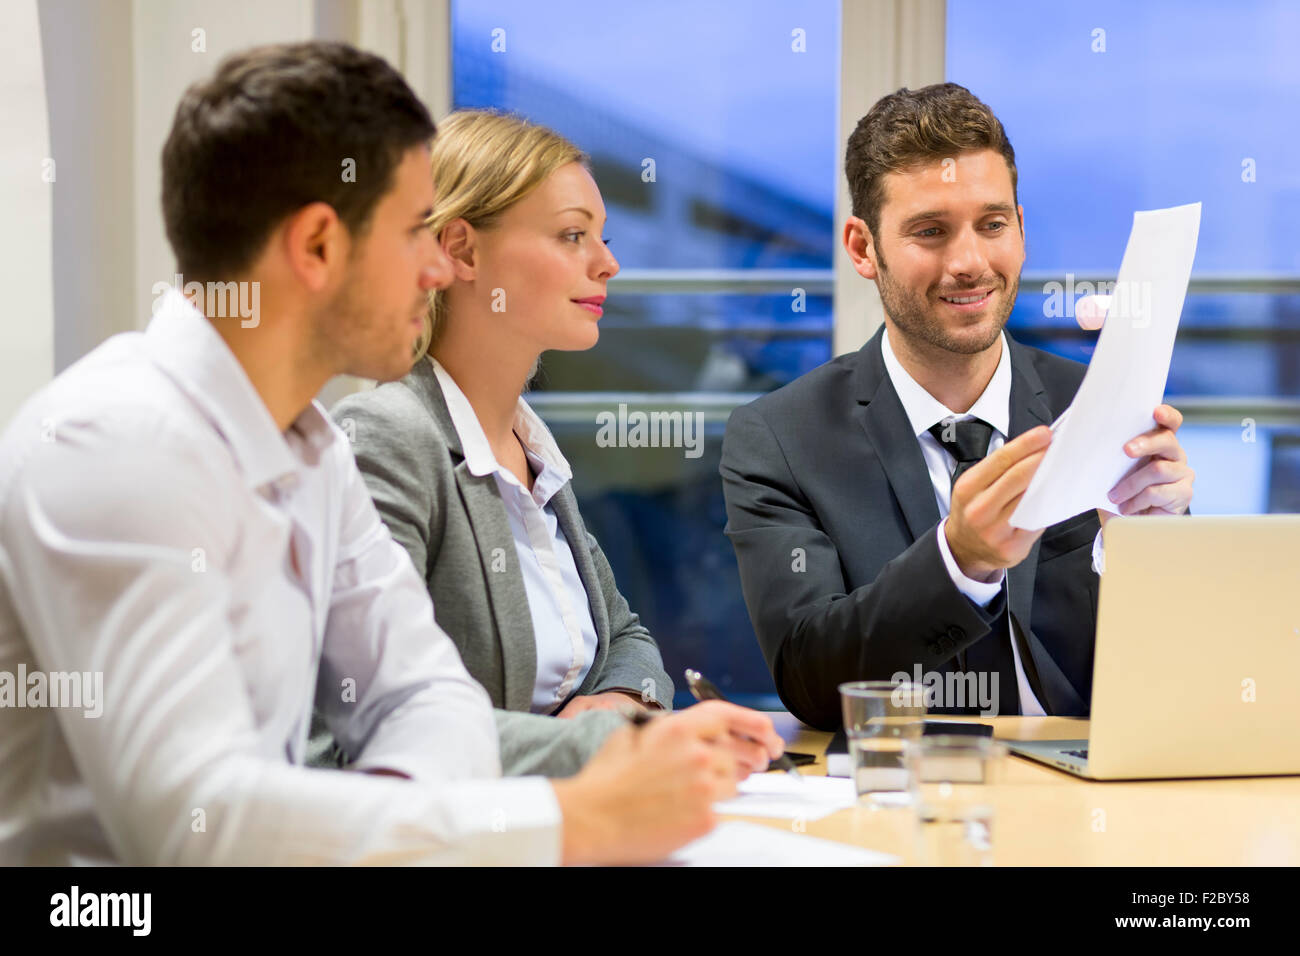 Businessmen and women arguing across boardroom table Stock Photo